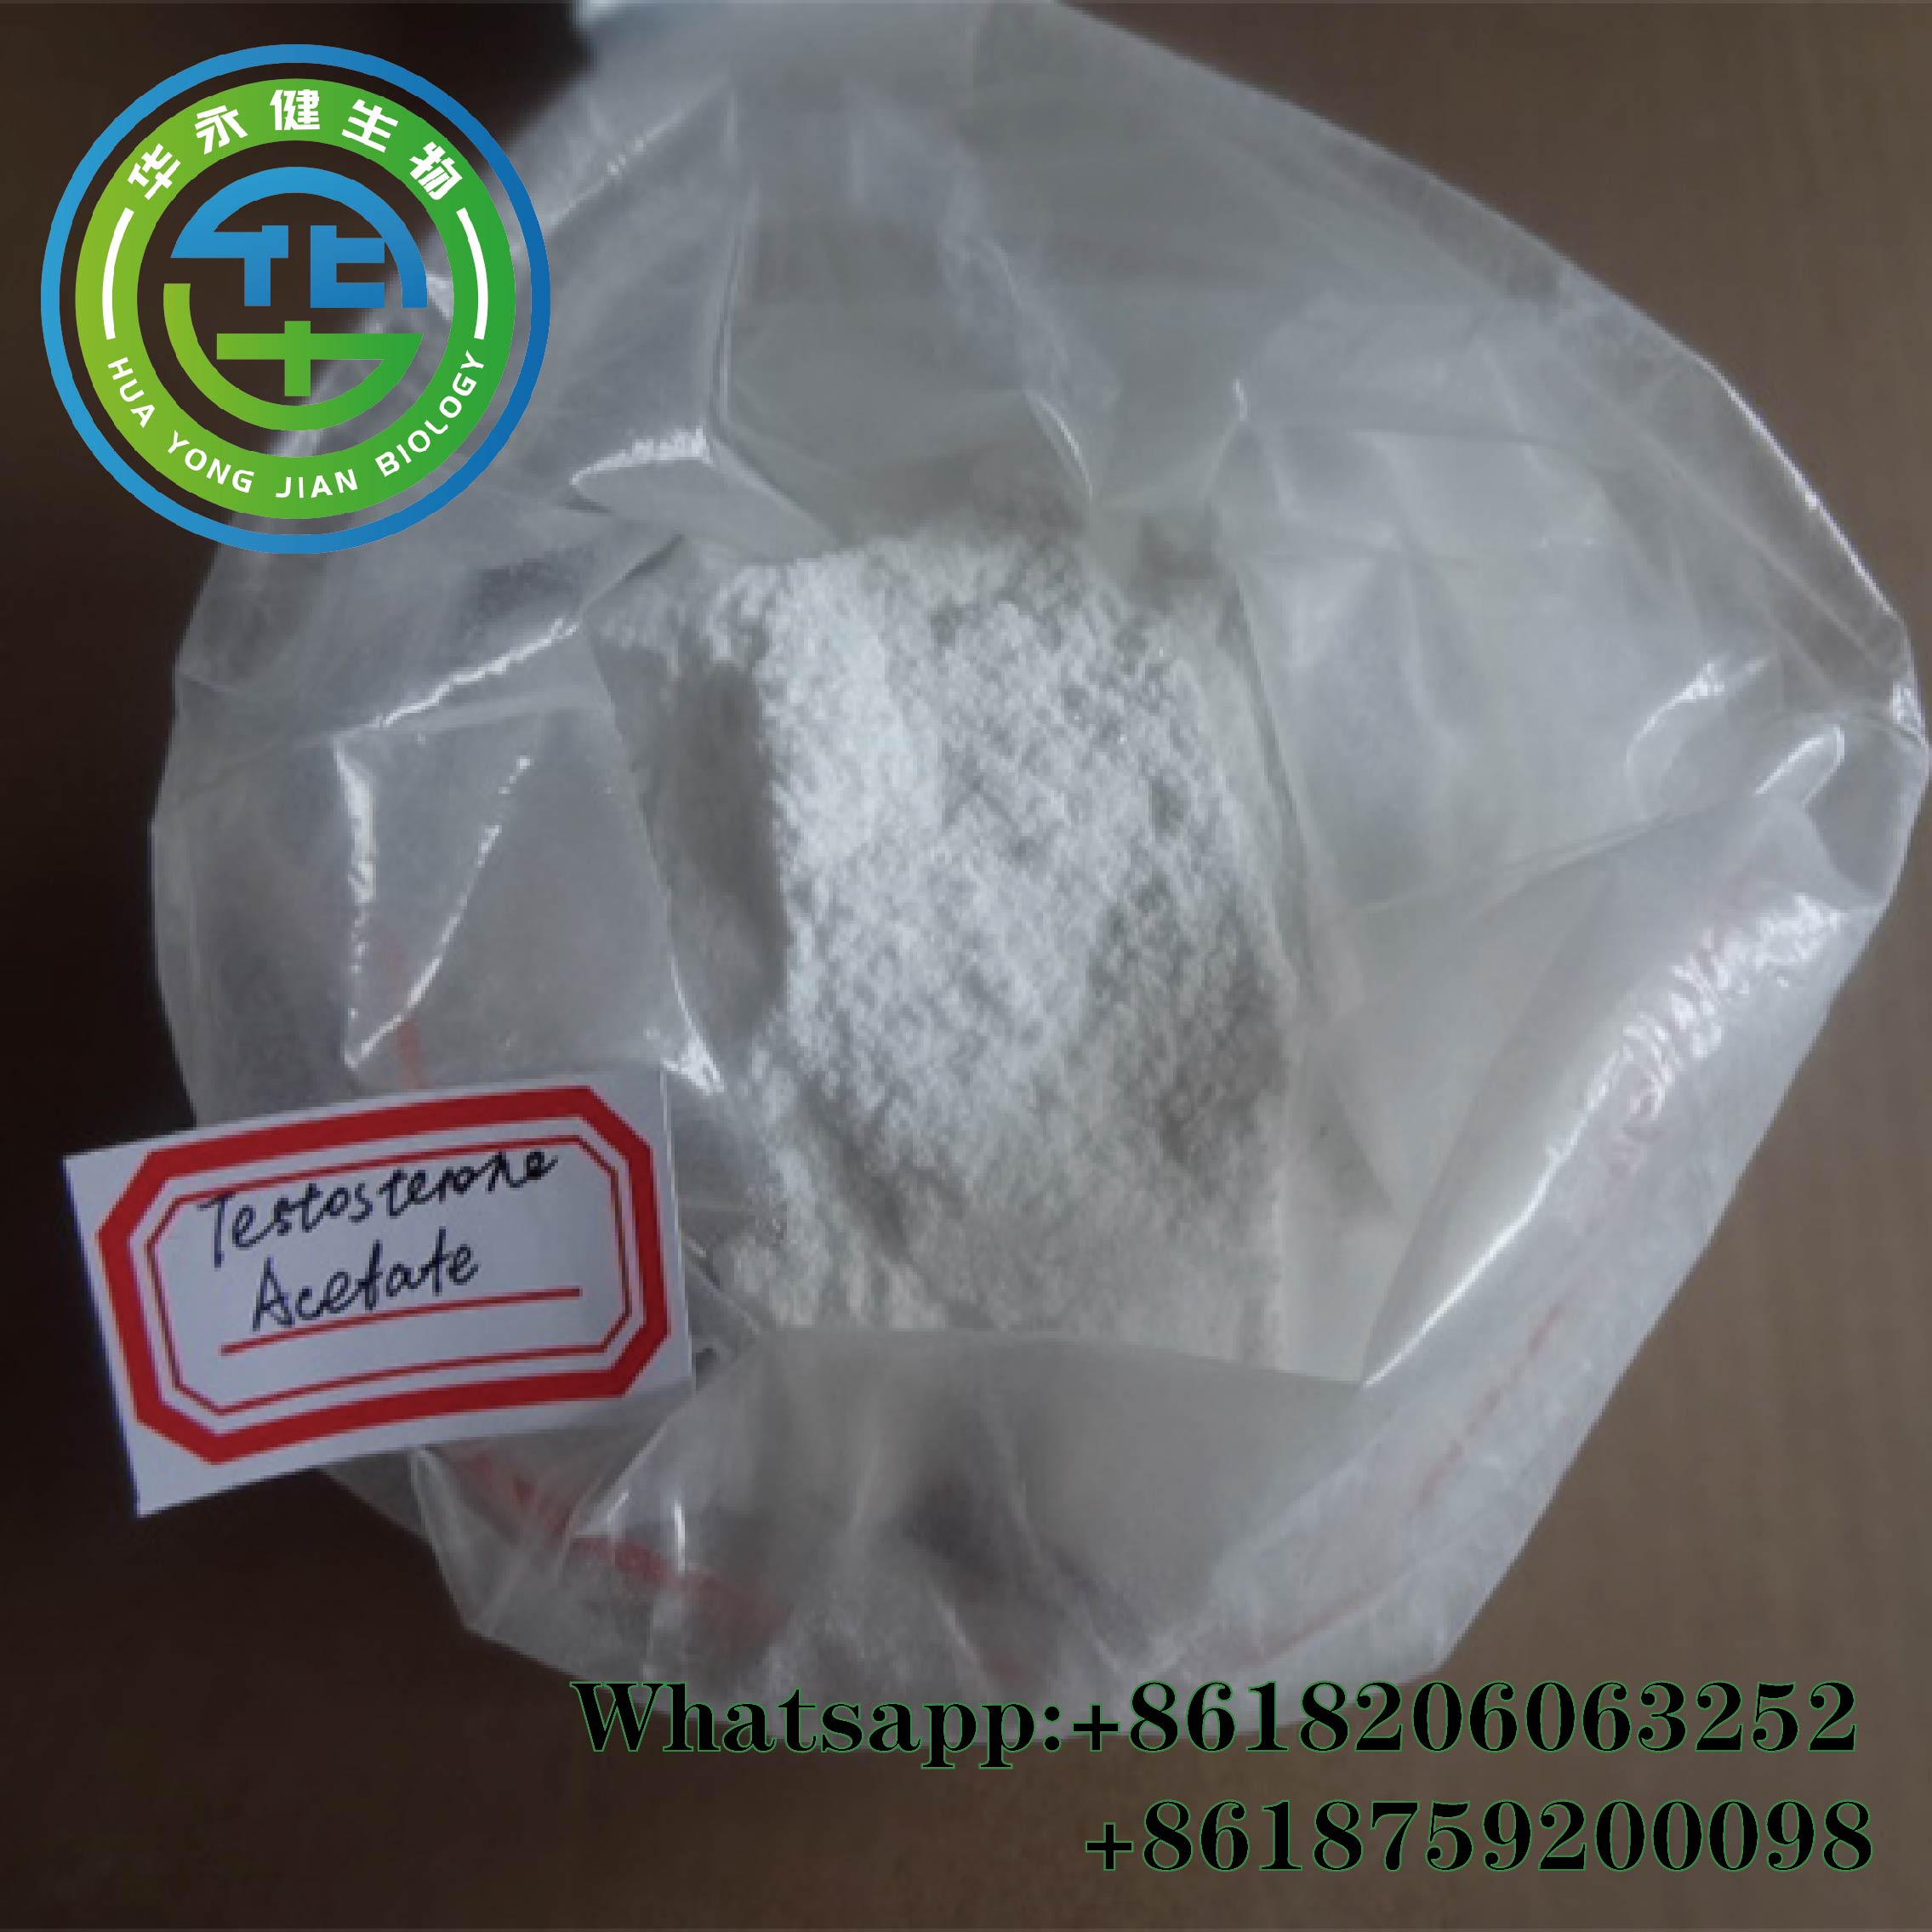 Testosterone Acetate Testosterone Raw Powder Test Ace CAS: 1045-69-8 Short Ester White Solid Appearance